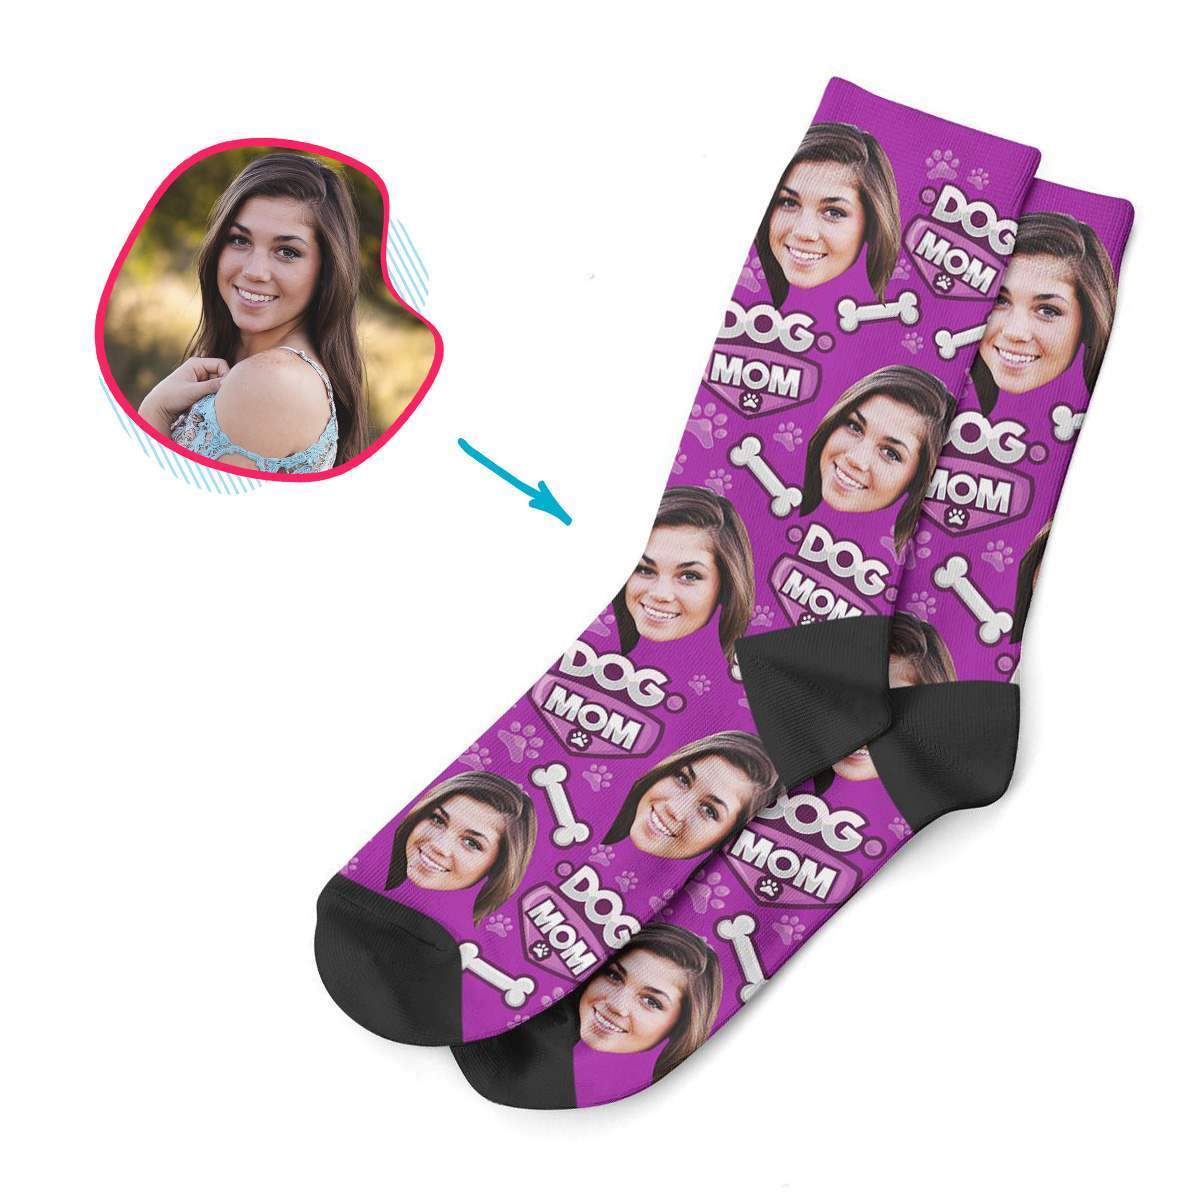 purple Dog Mom socks personalized with photo of face printed on them